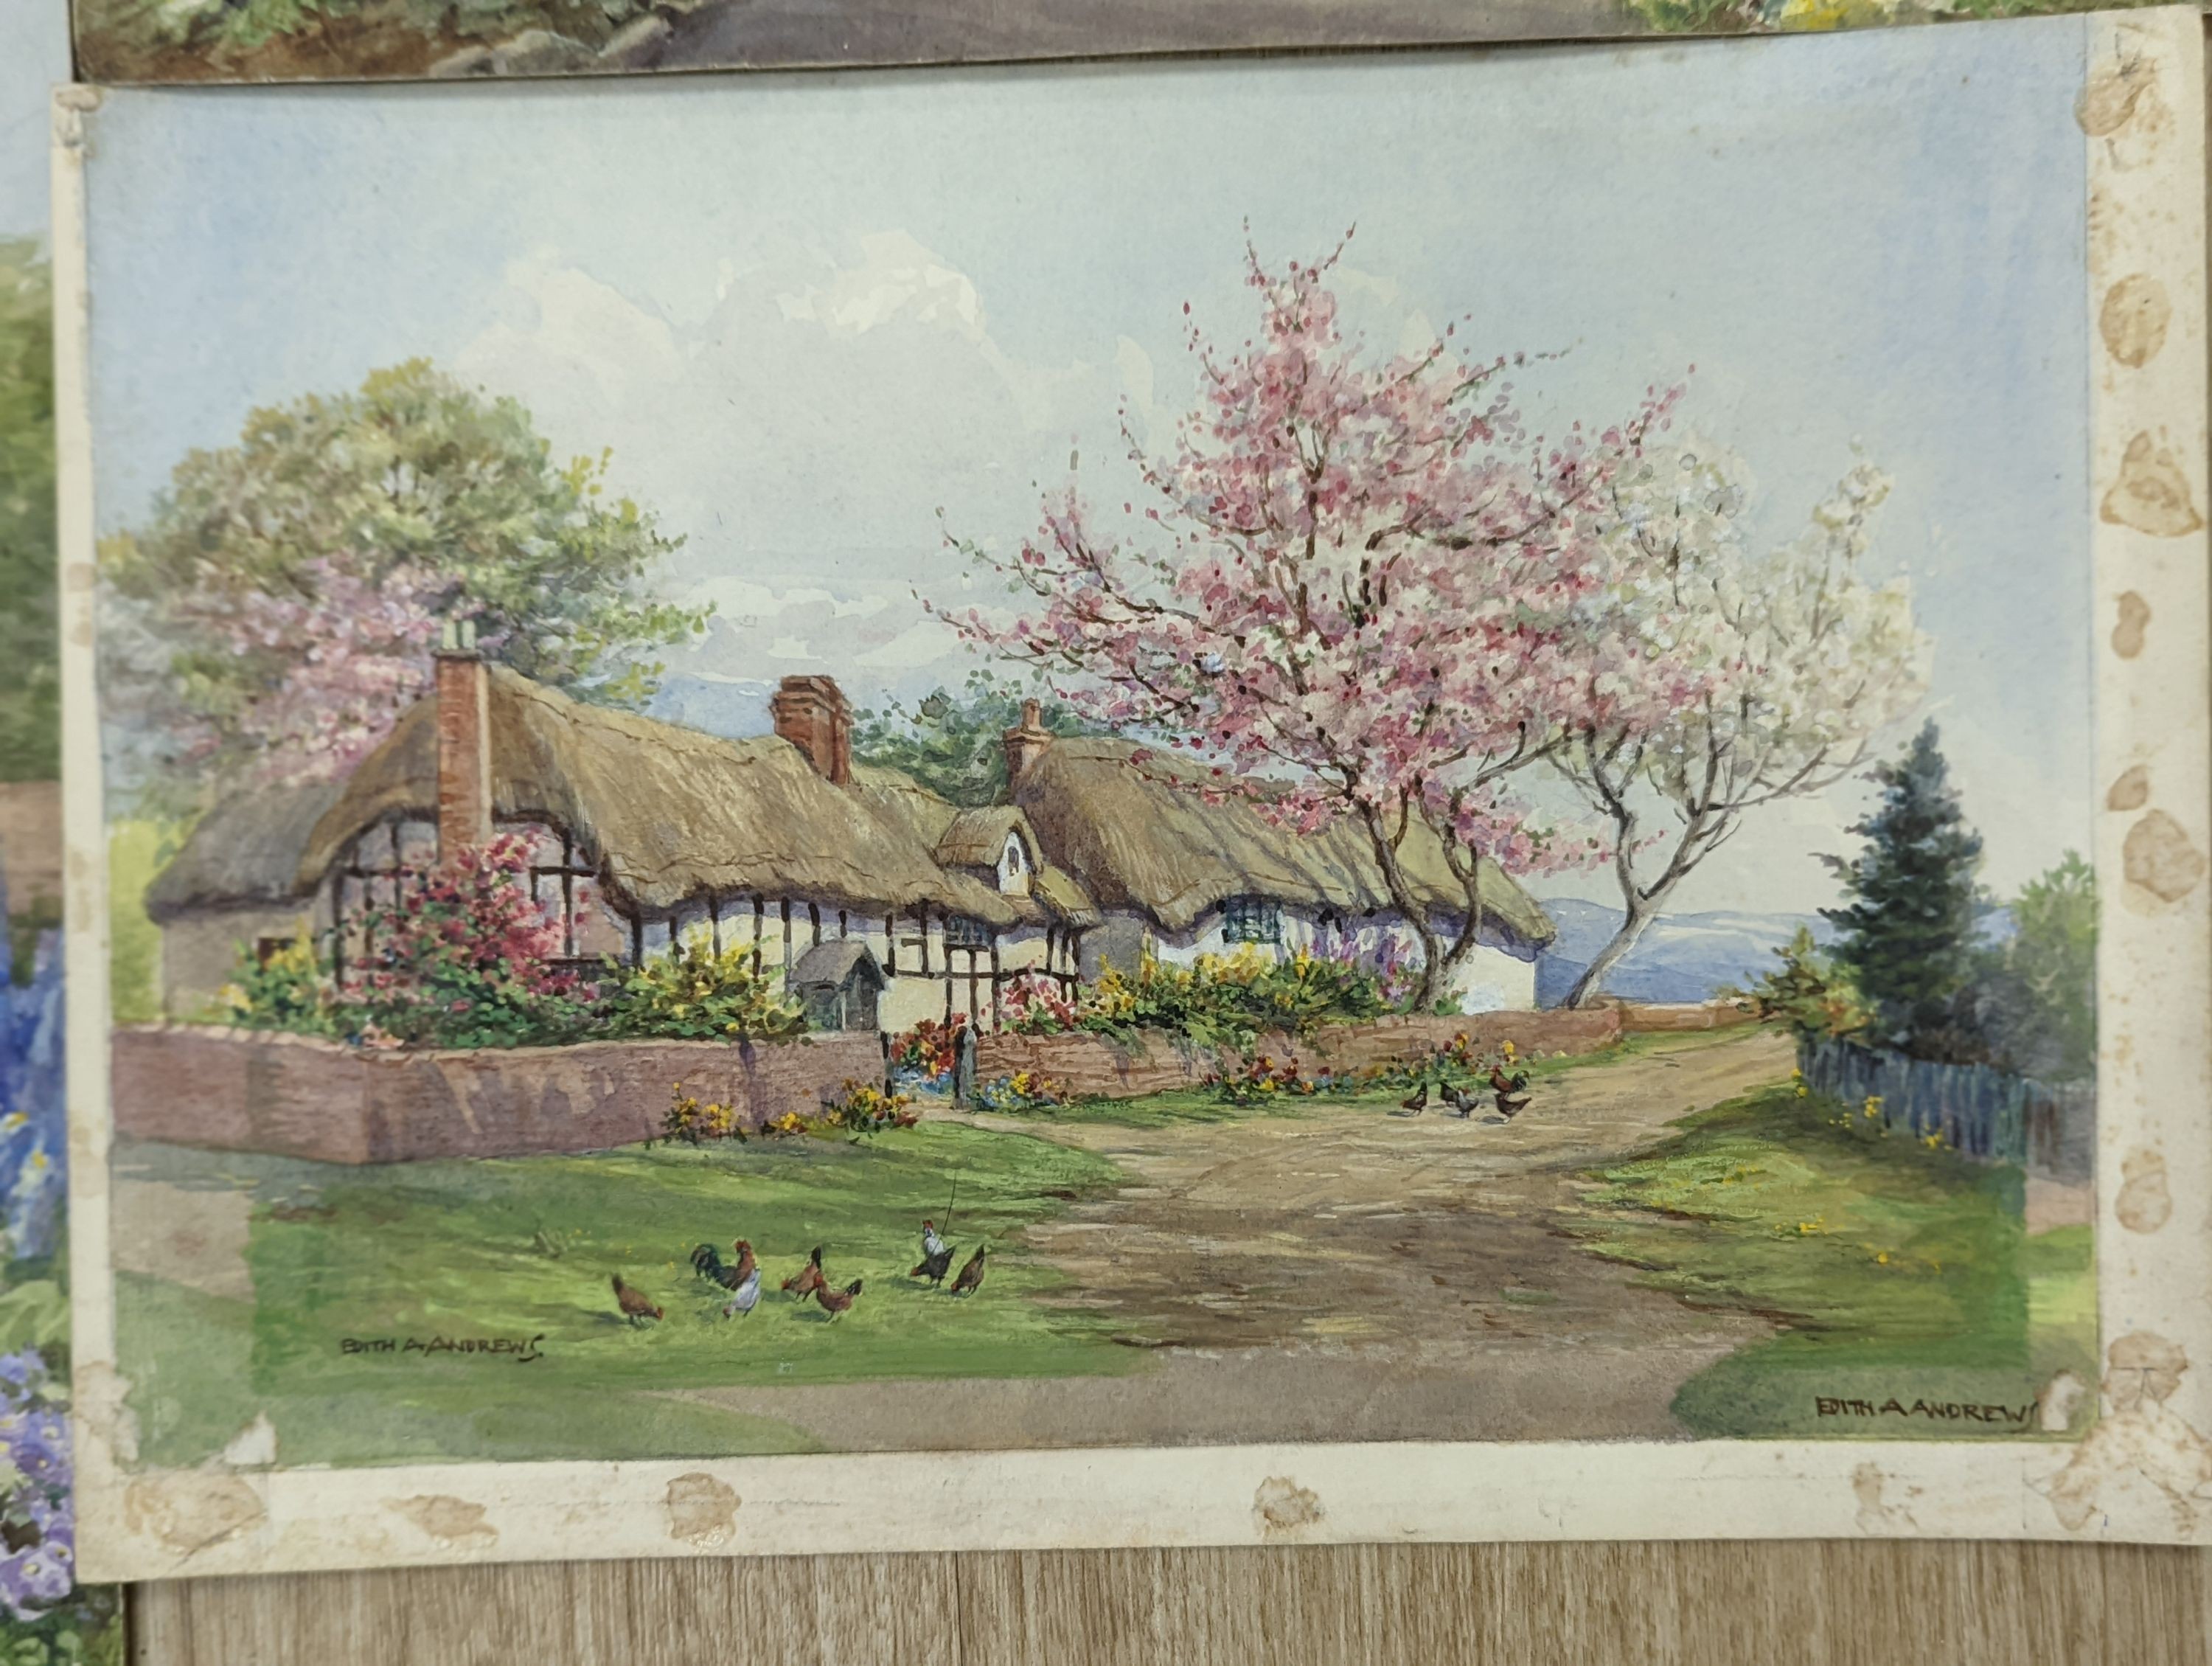 Edith Alice Andrews (1900-1940), four watercolours; Late Summer, cottages and blossom, In A Sussex Garden & herbaceous borders, signed, largest 29 x 39cm.